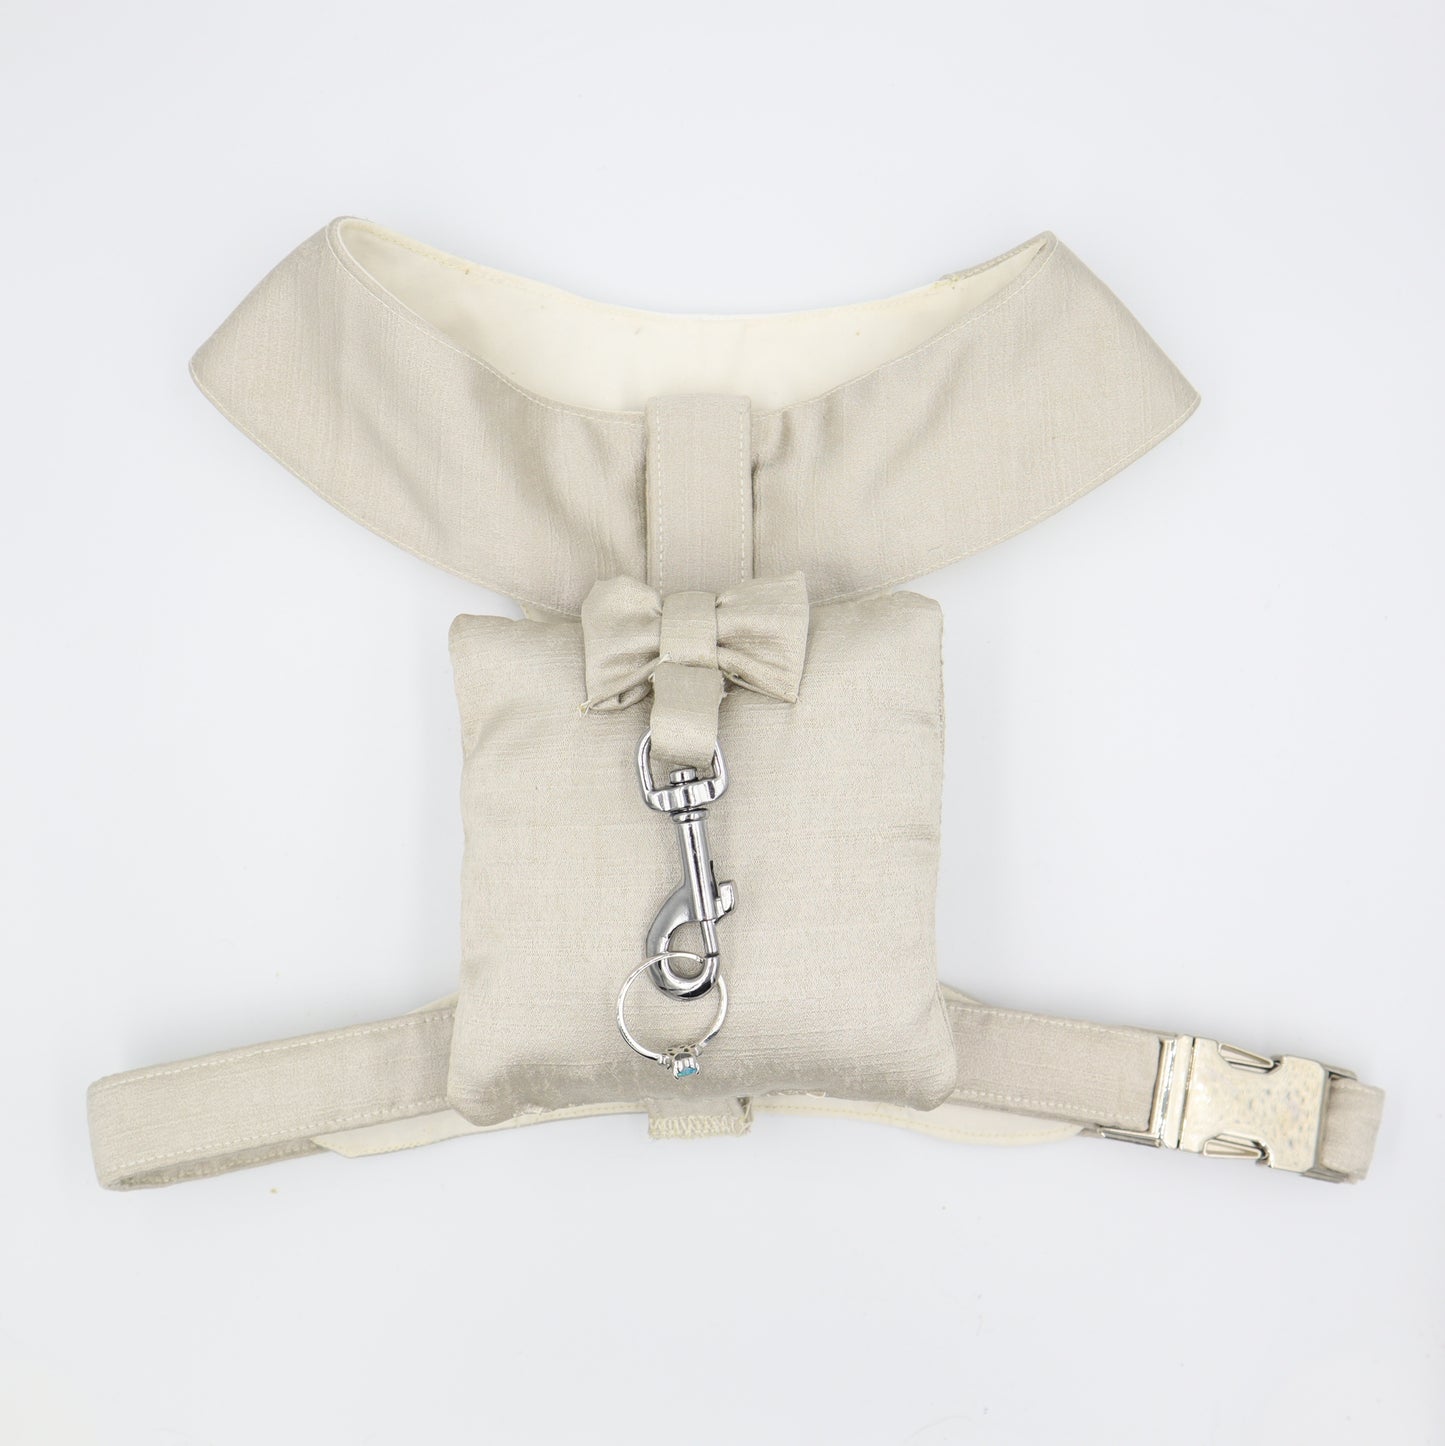 Tuxedo Wedding Dog Harness in Beige Natural Shot Silk Satin with ADD ON Available Matching Ring Pillow CHOICE of COLOURS